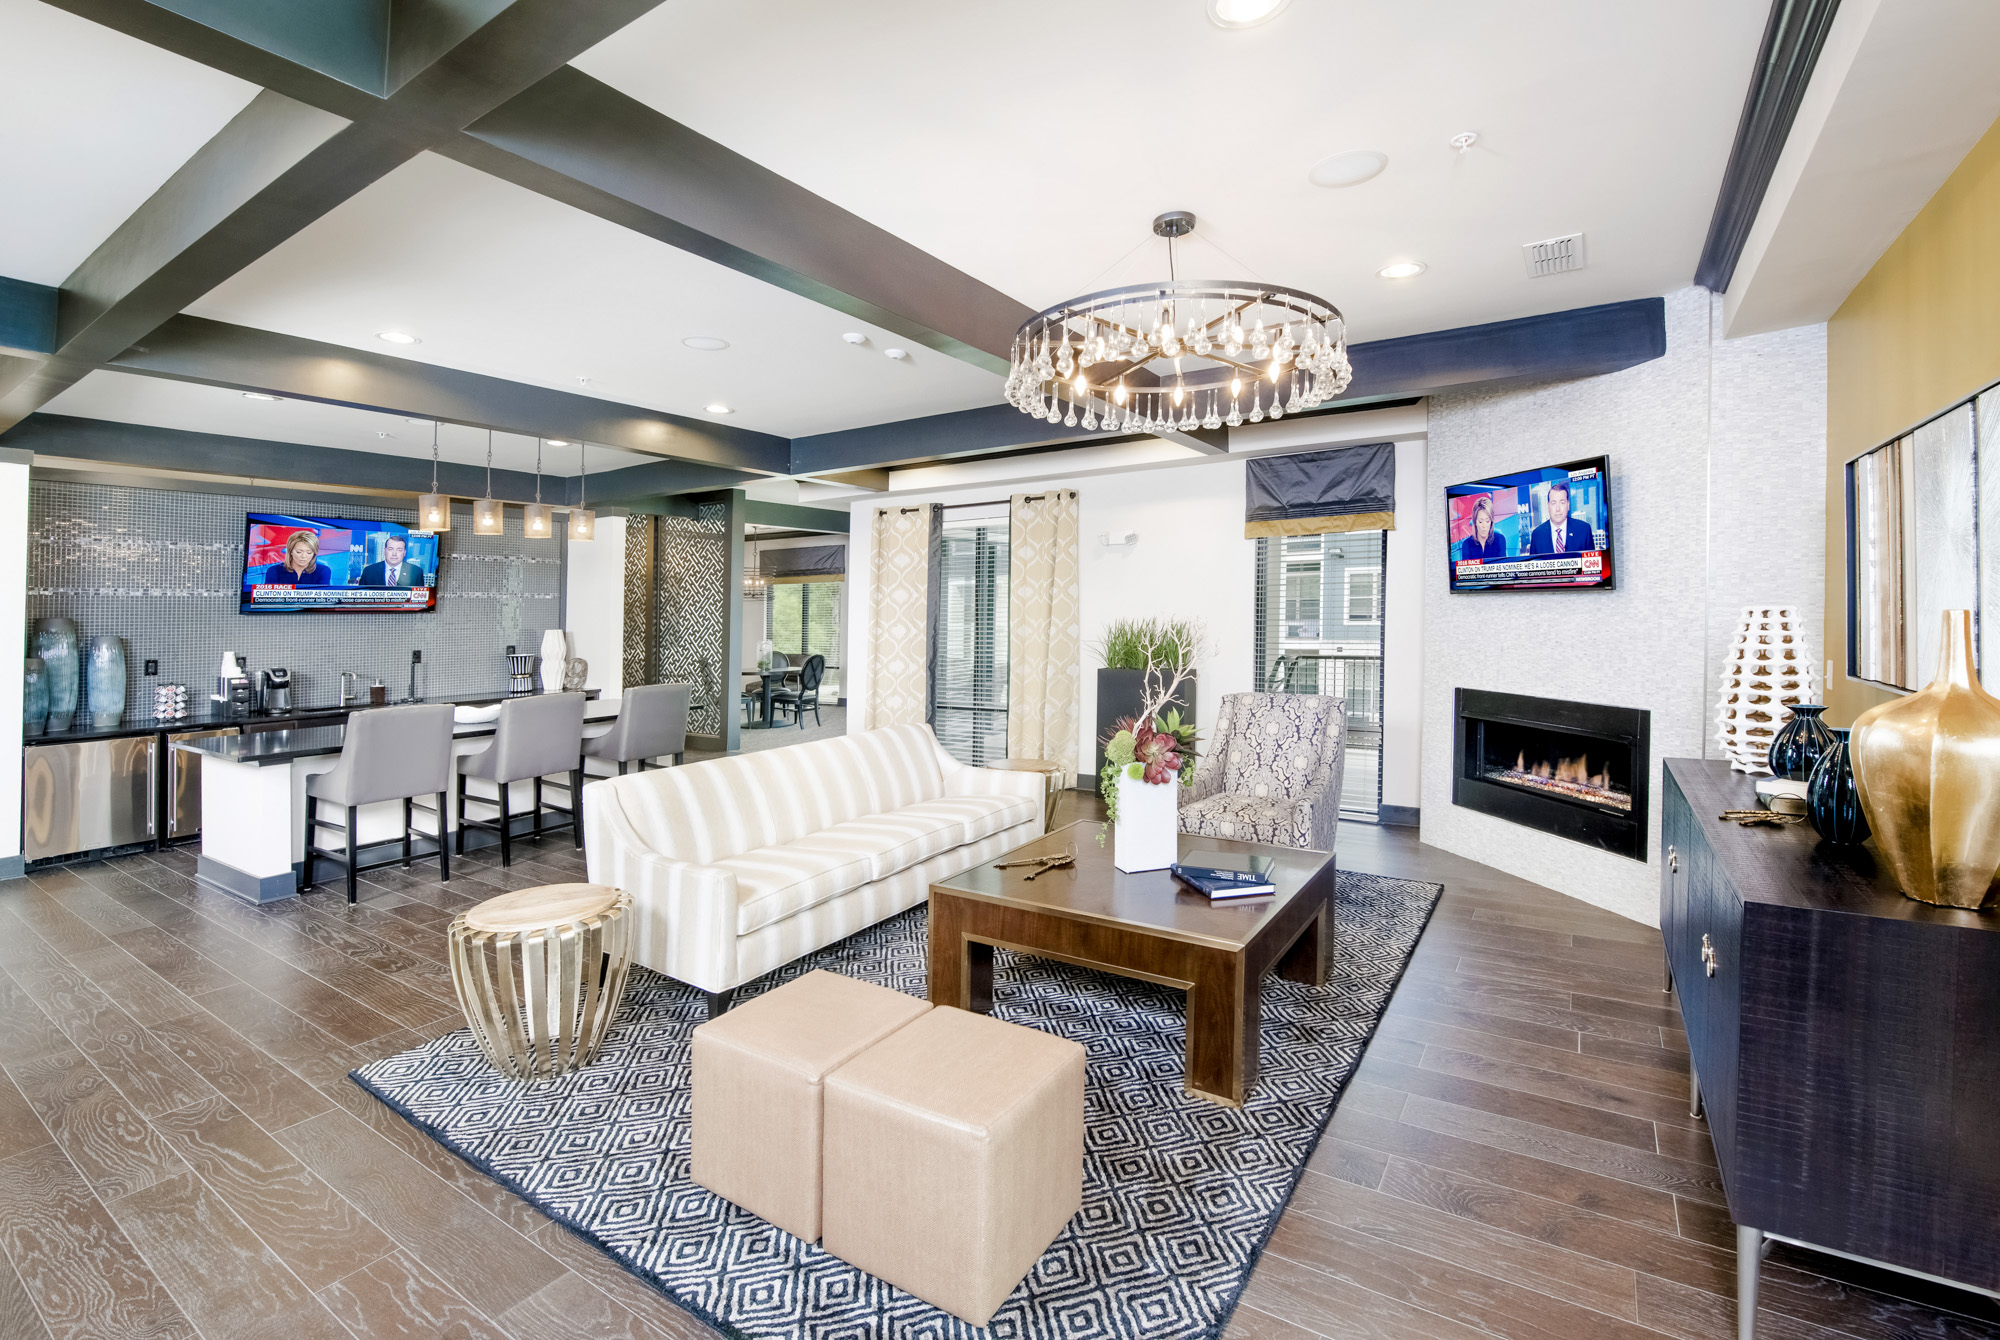 A seating area with a fireplace and mounted television on the right-side of the room with barstools surrounding a kitchen island and mounted television on the left.